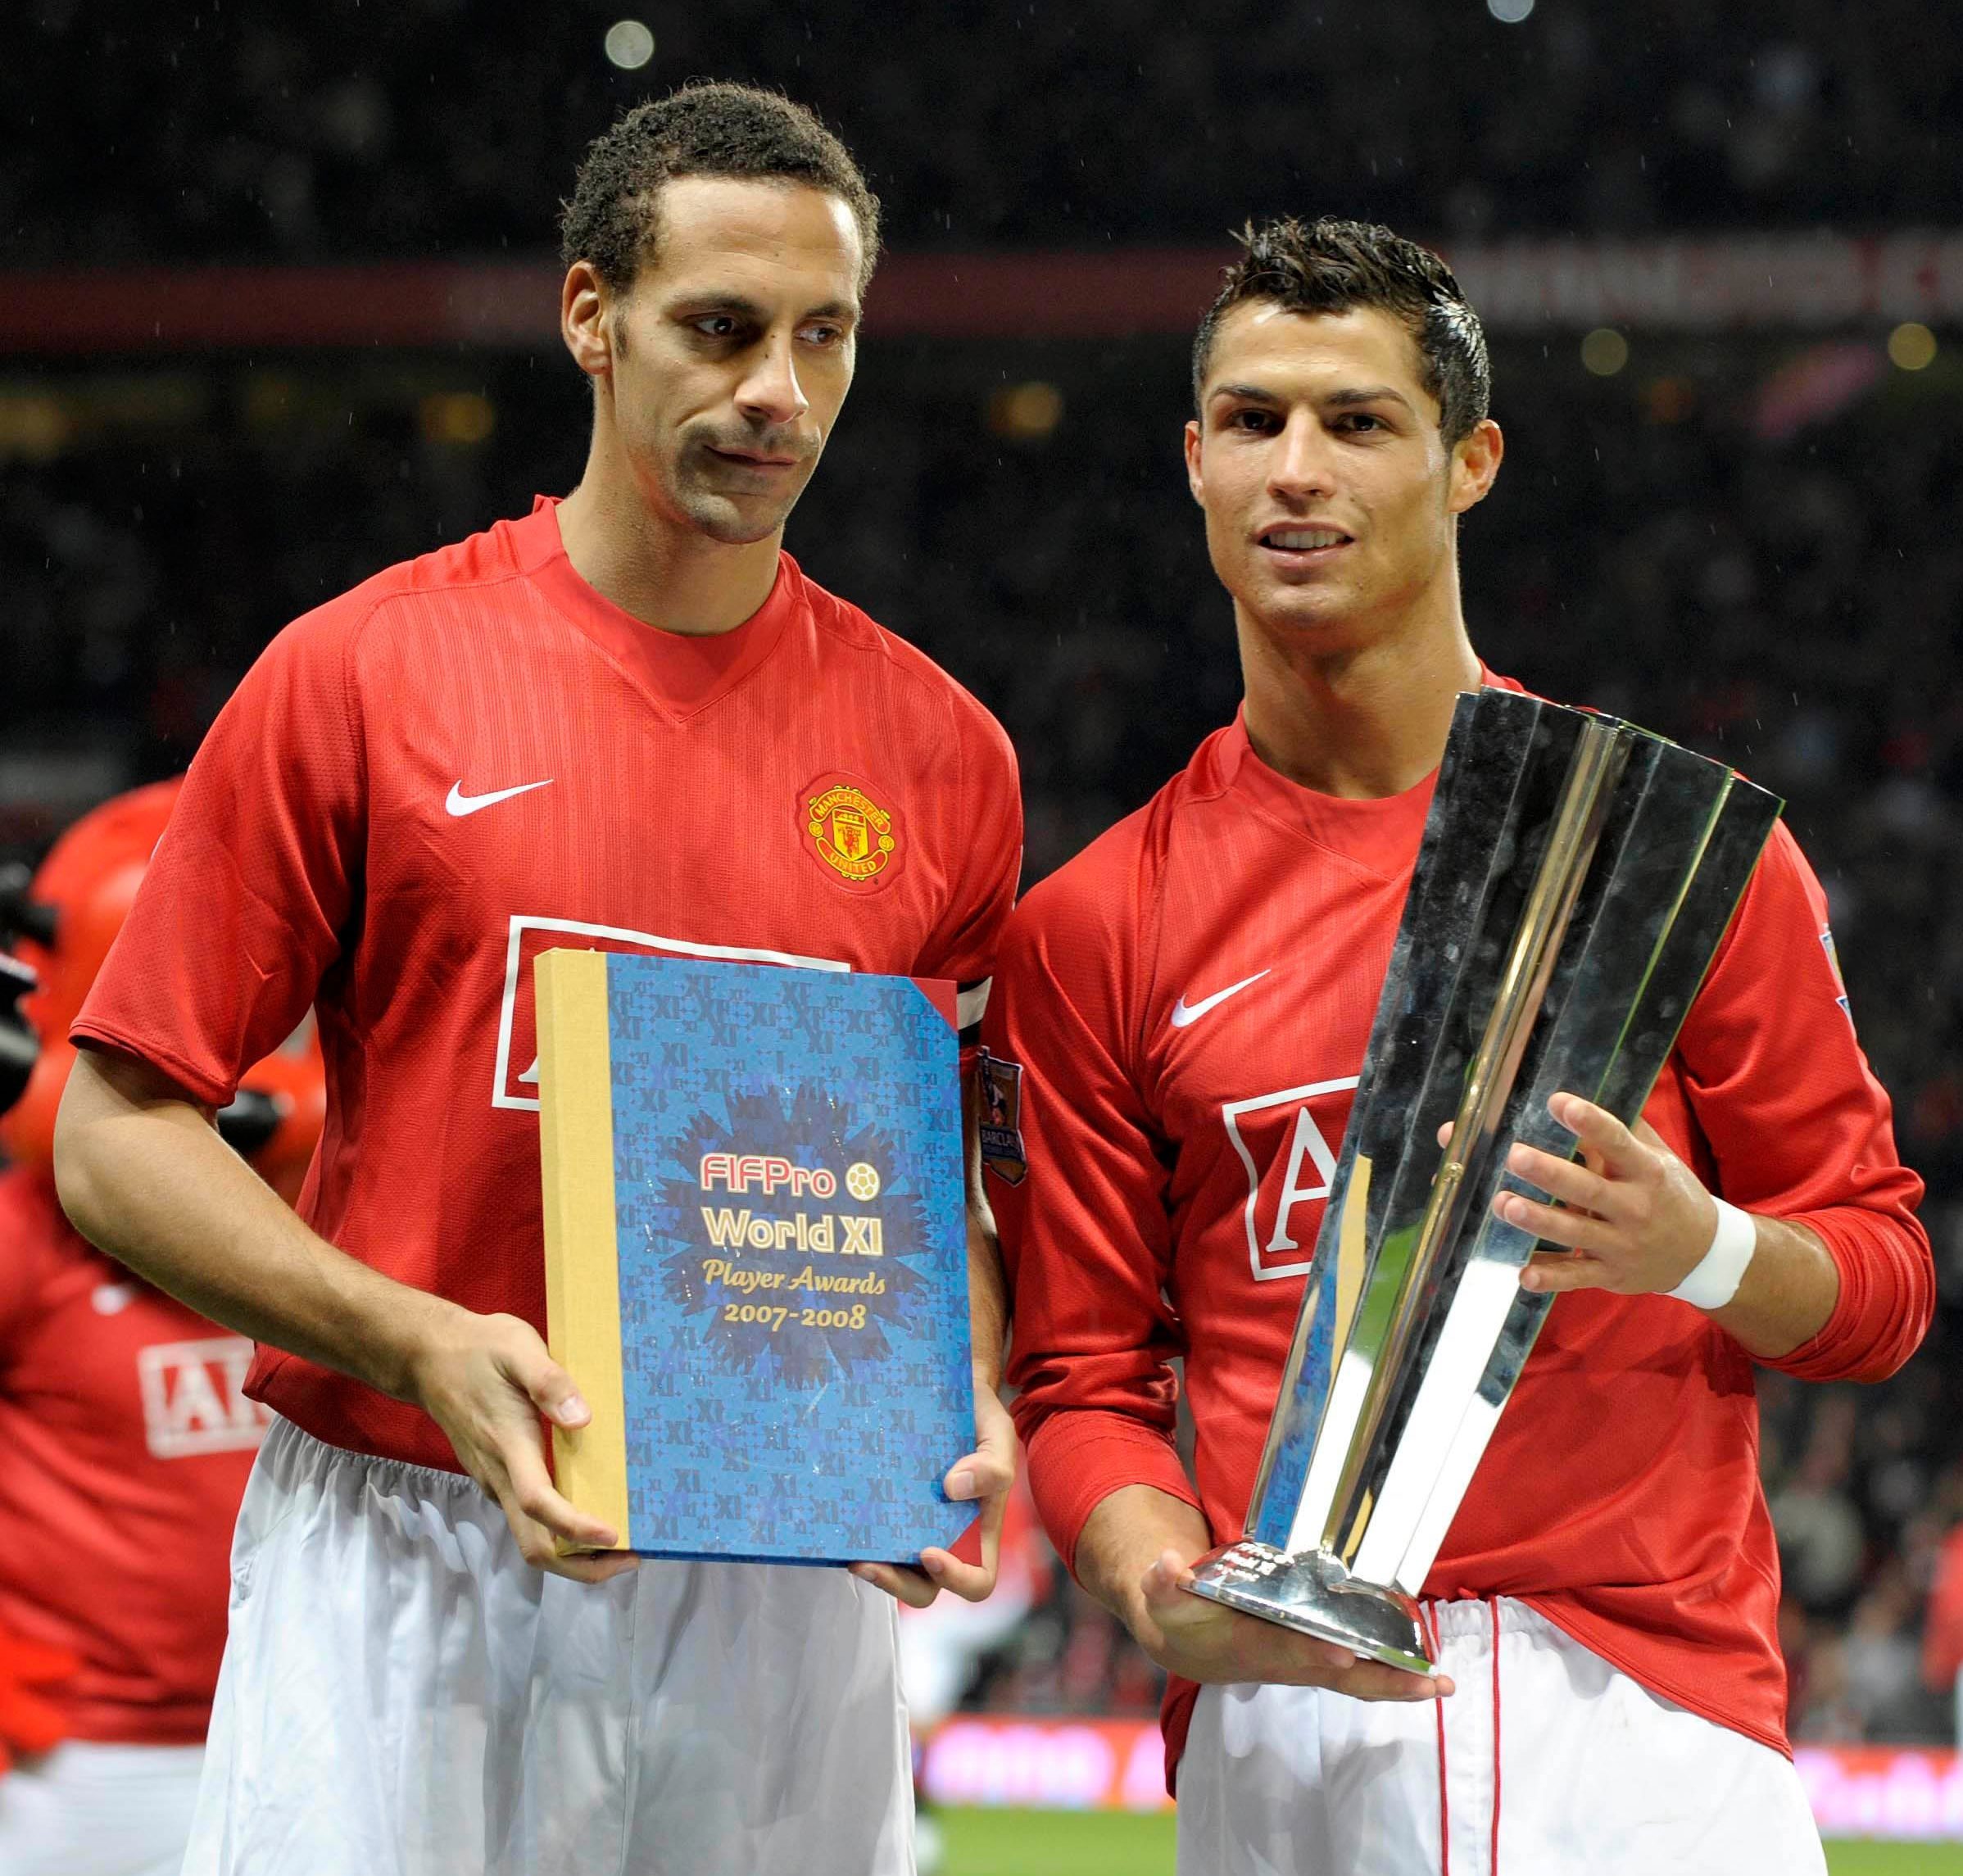 Manchester United legend, Rio Ferdinand believes there is no chance that Cristiano Ronaldo will return to Old Trafford this summer.